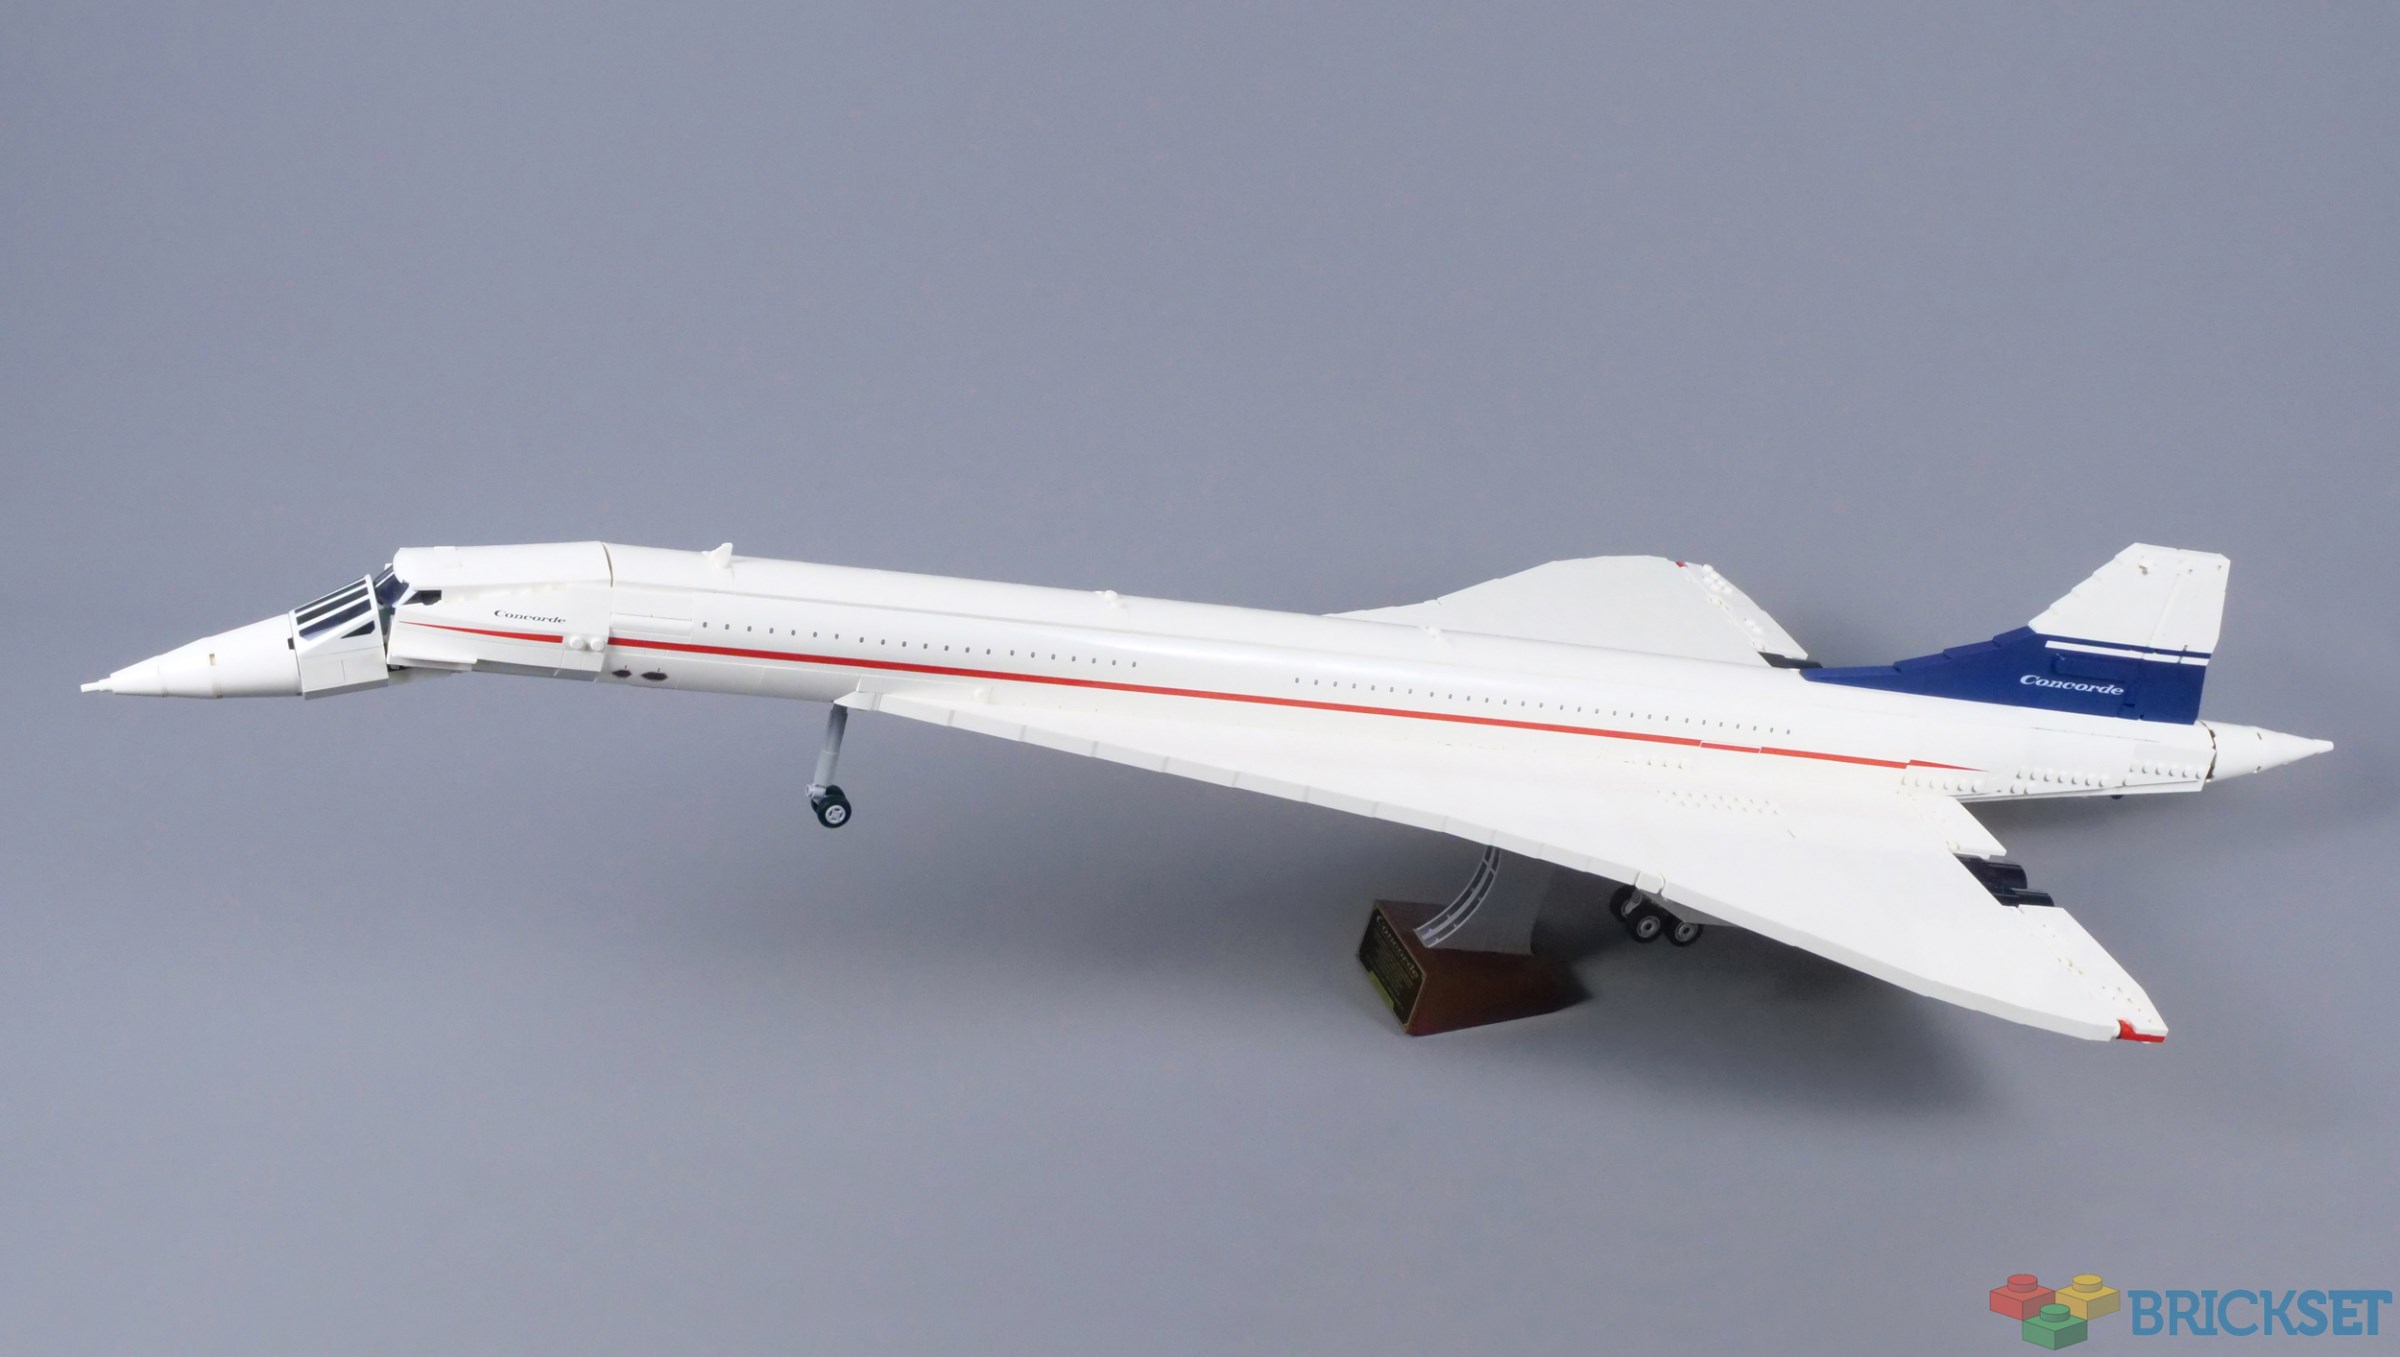 I wasn't ready for the LEGO Concorde (Review) 